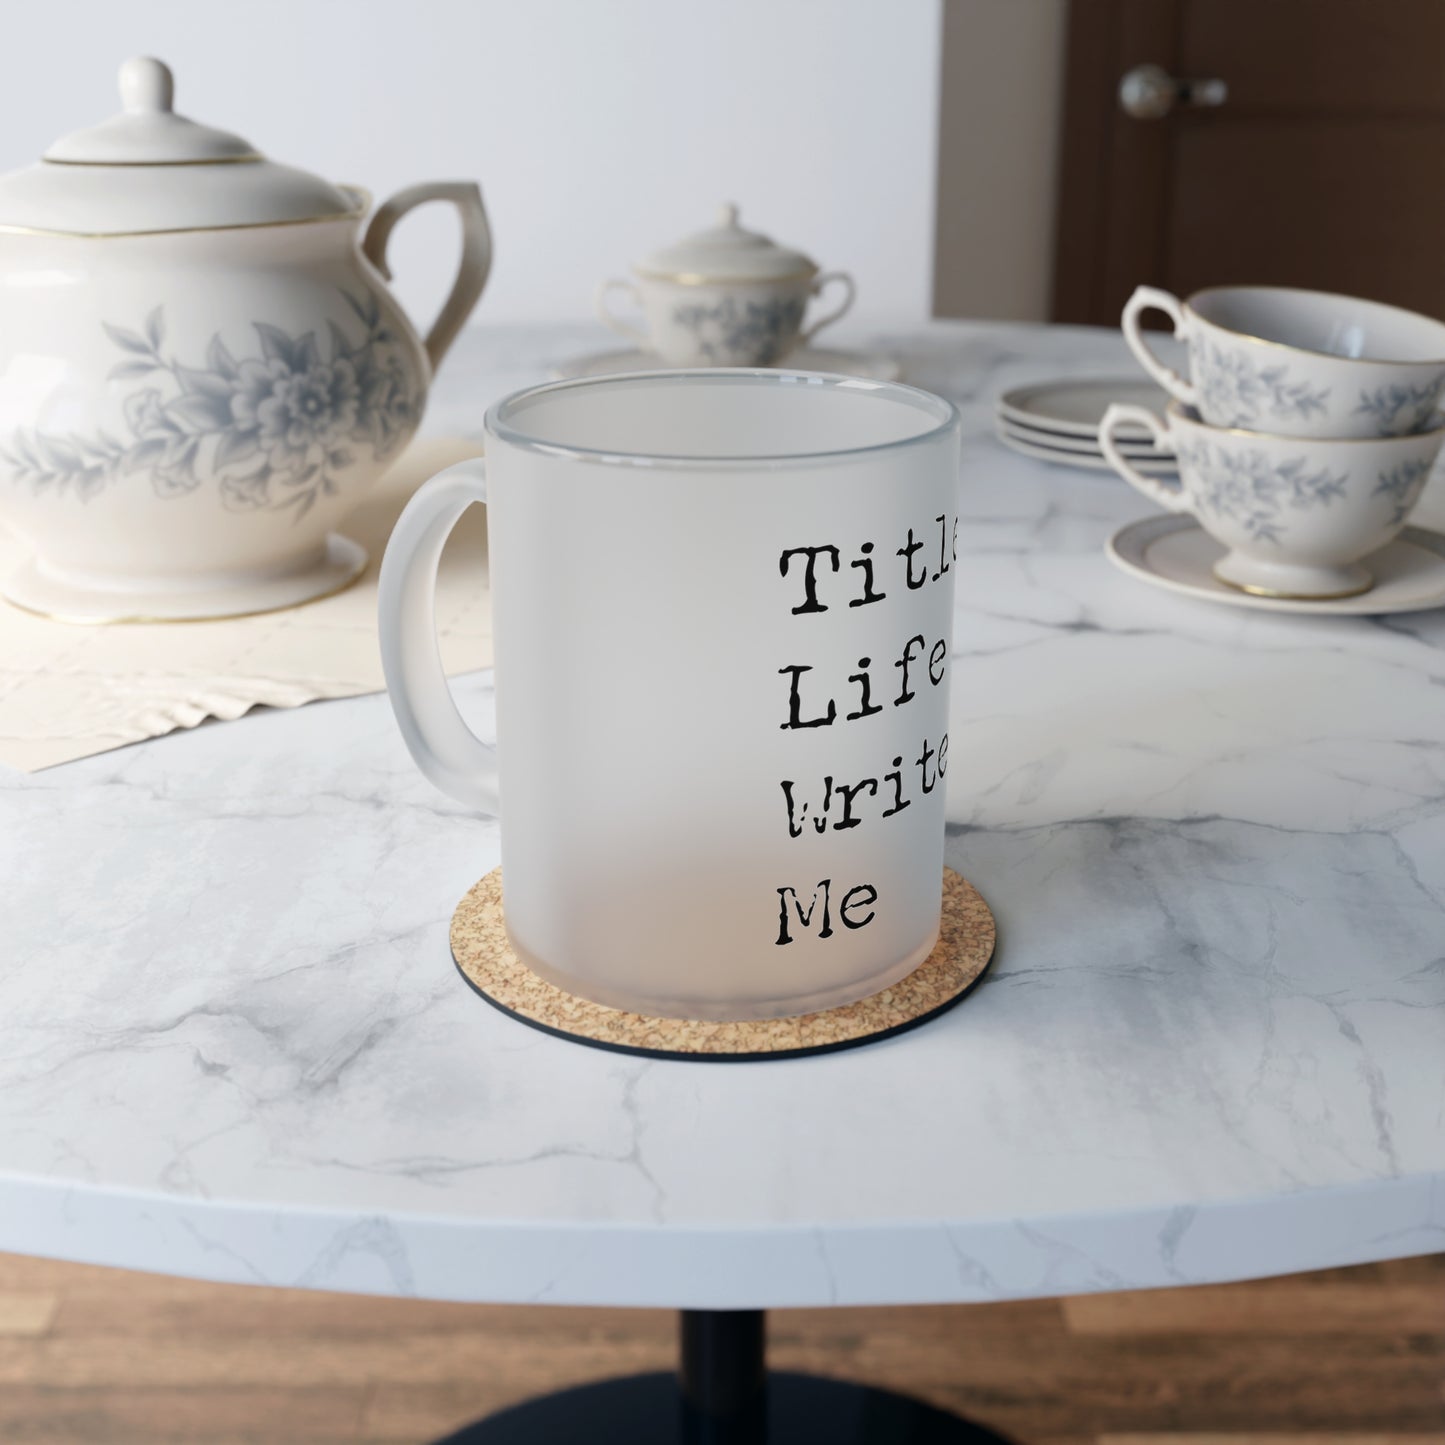 Frosted Glass Mug With Text Title: Life Writer Me